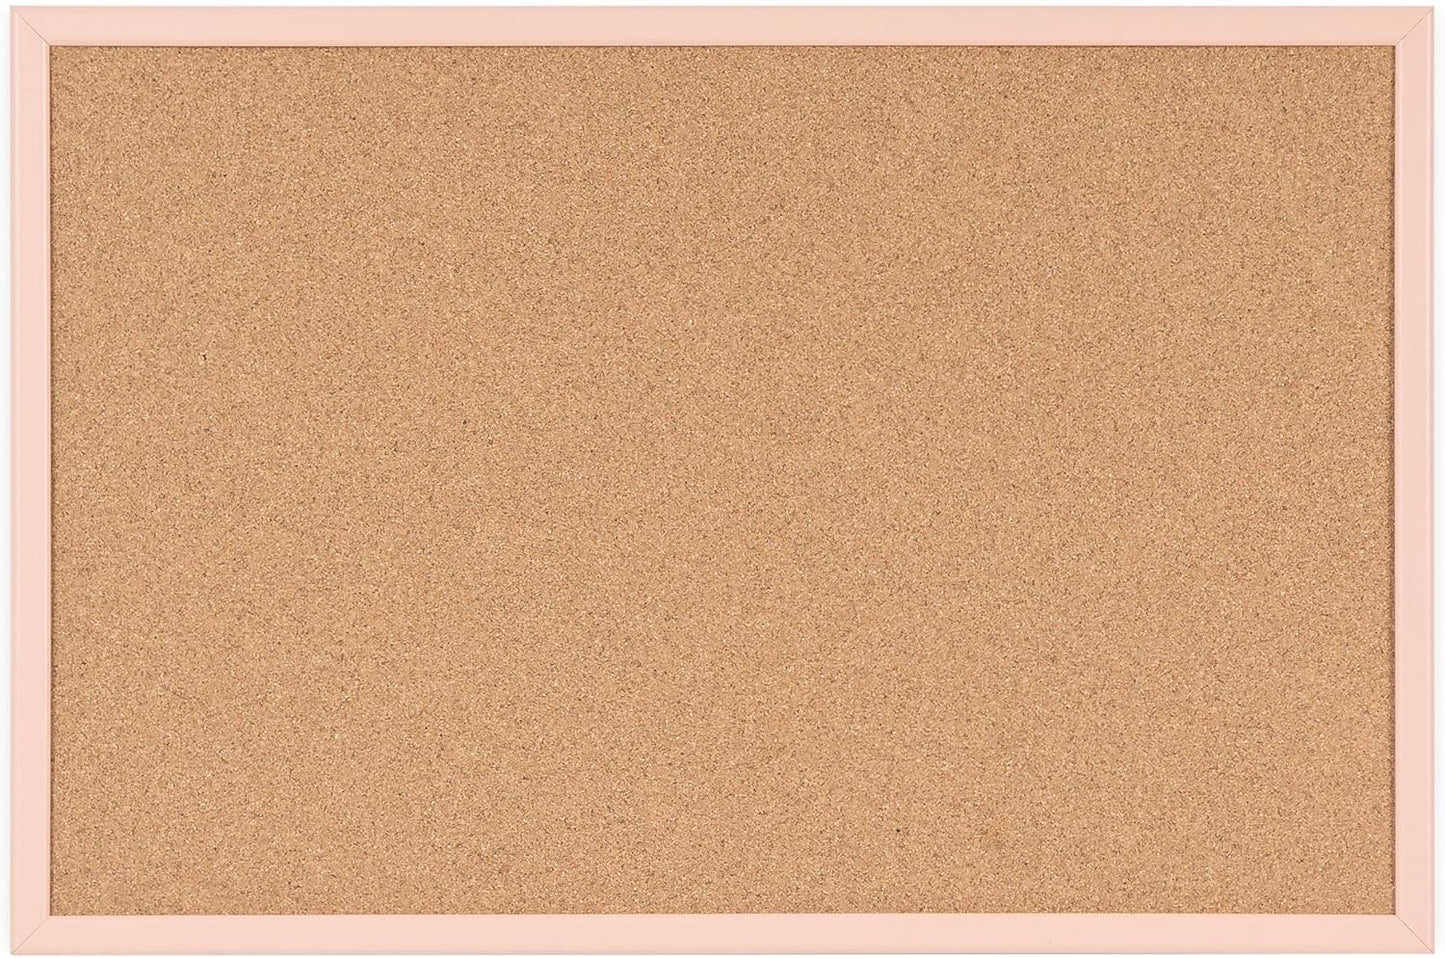 MasterVision Pastel Collection Cork Bulletin Board, Salmon Colored MDF Frame, Self-Healing Cork for Push Pins, 23.62" x 17.72"